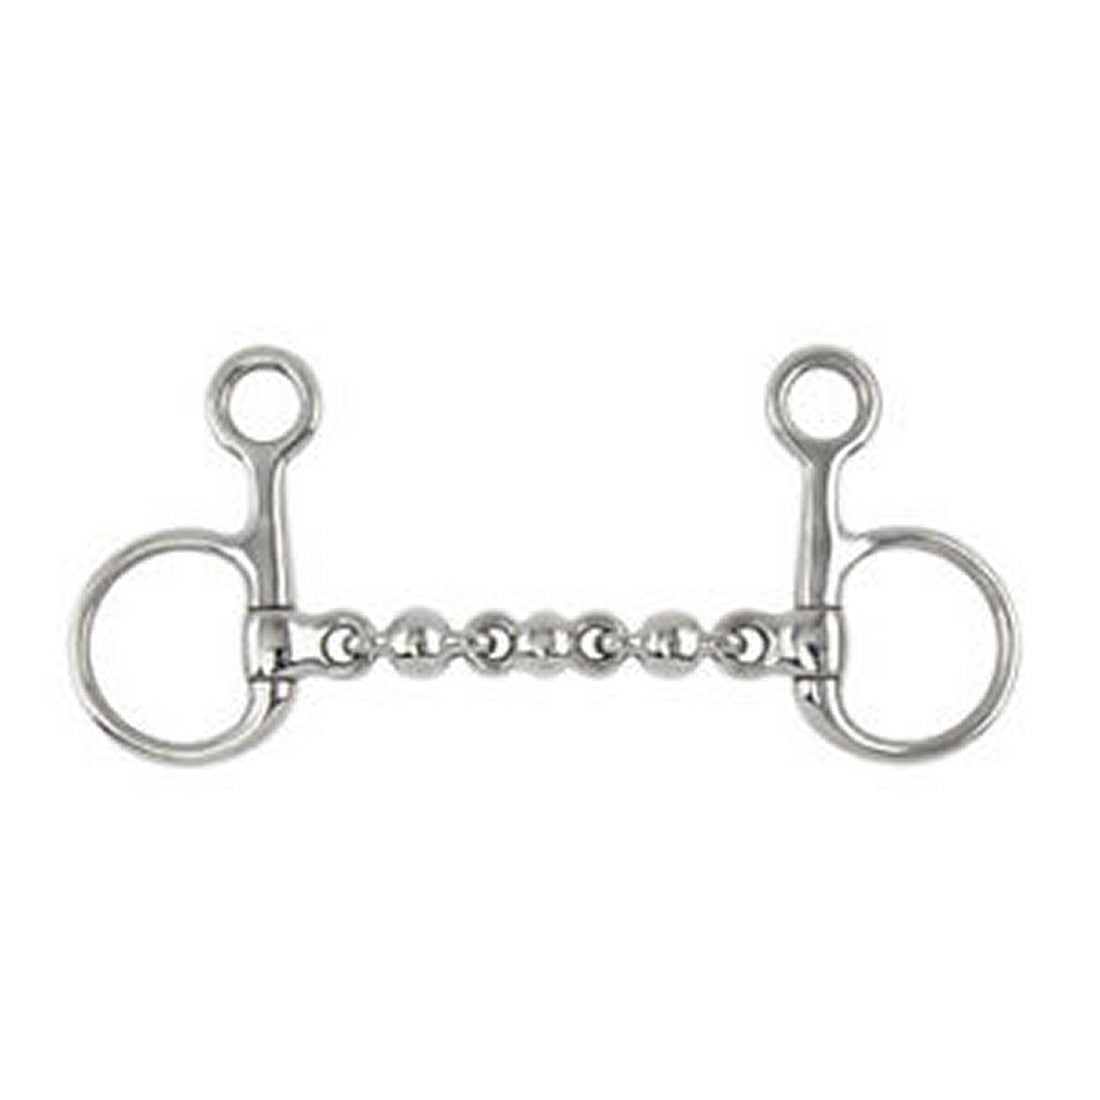 SHIRES 6271 HANGING CHEEK WATERFORD SNAFFLE